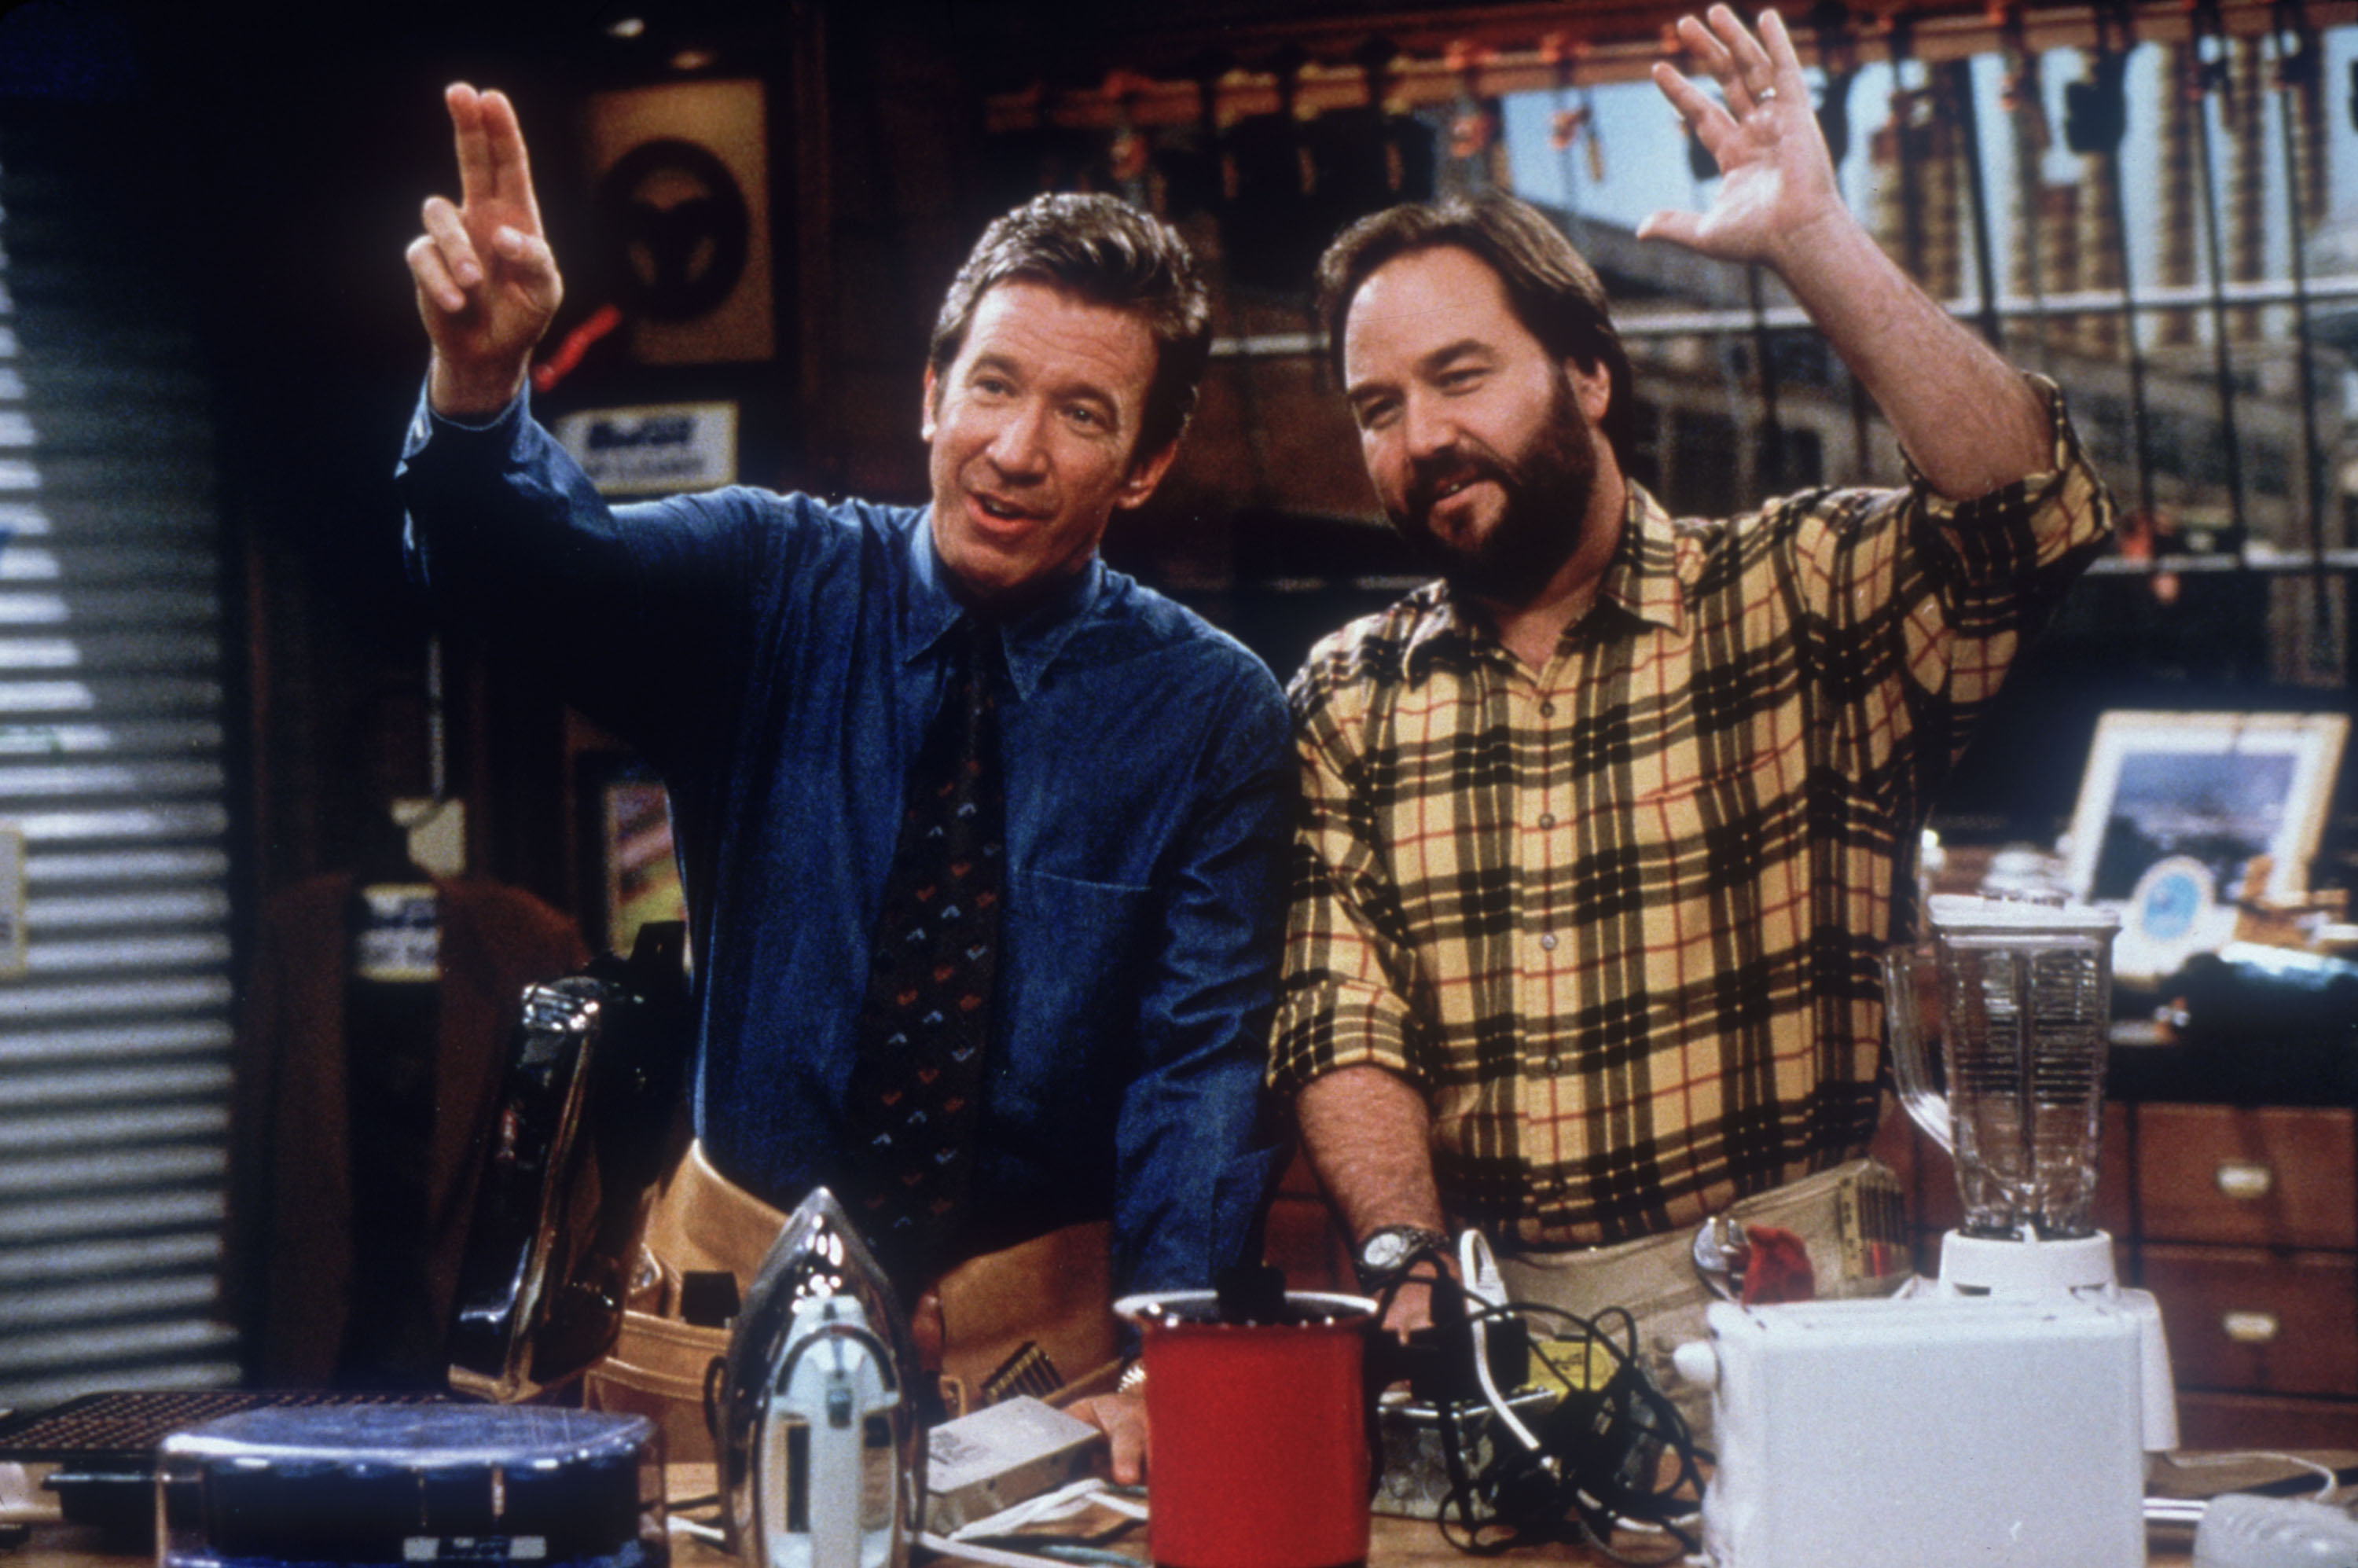 Tim Allen and Richard Karn's Show Is Back With a New Name - Bob Vila